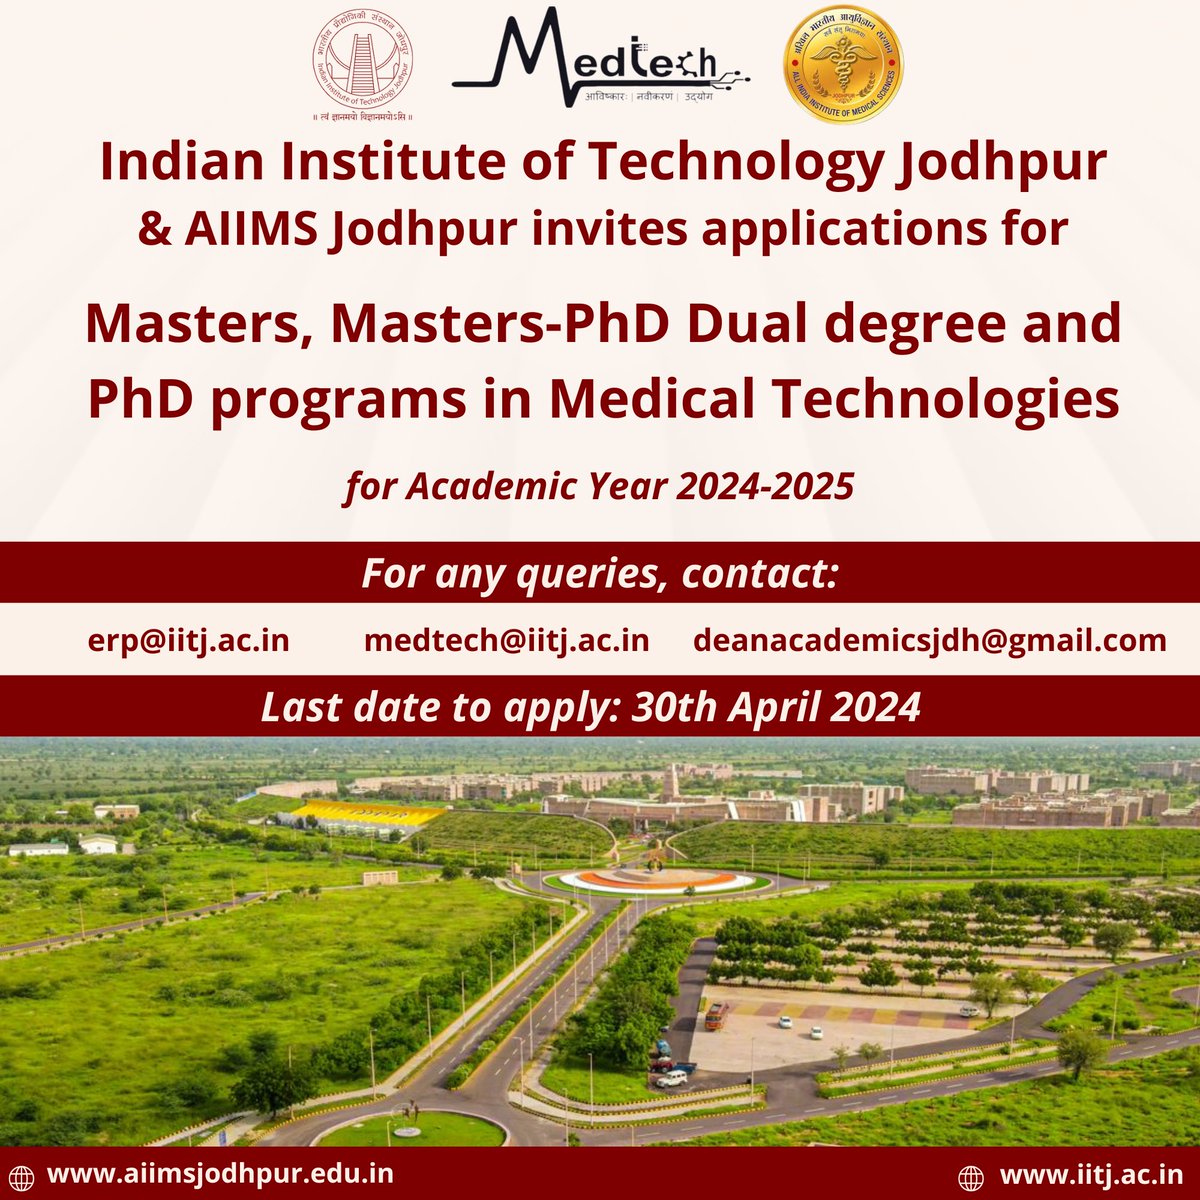 IIT Jodhpur in collaboration with AIIMS Jodhpur is inviting applications for Masters, Masters-PhD Dual degree, and PhD programs in #MedicalTechnologies for the academic year 2024-2025. Last Date to apply is 30th April 2024. #Education #HigherEducation #MedTech #IITJ #IITJodhpur